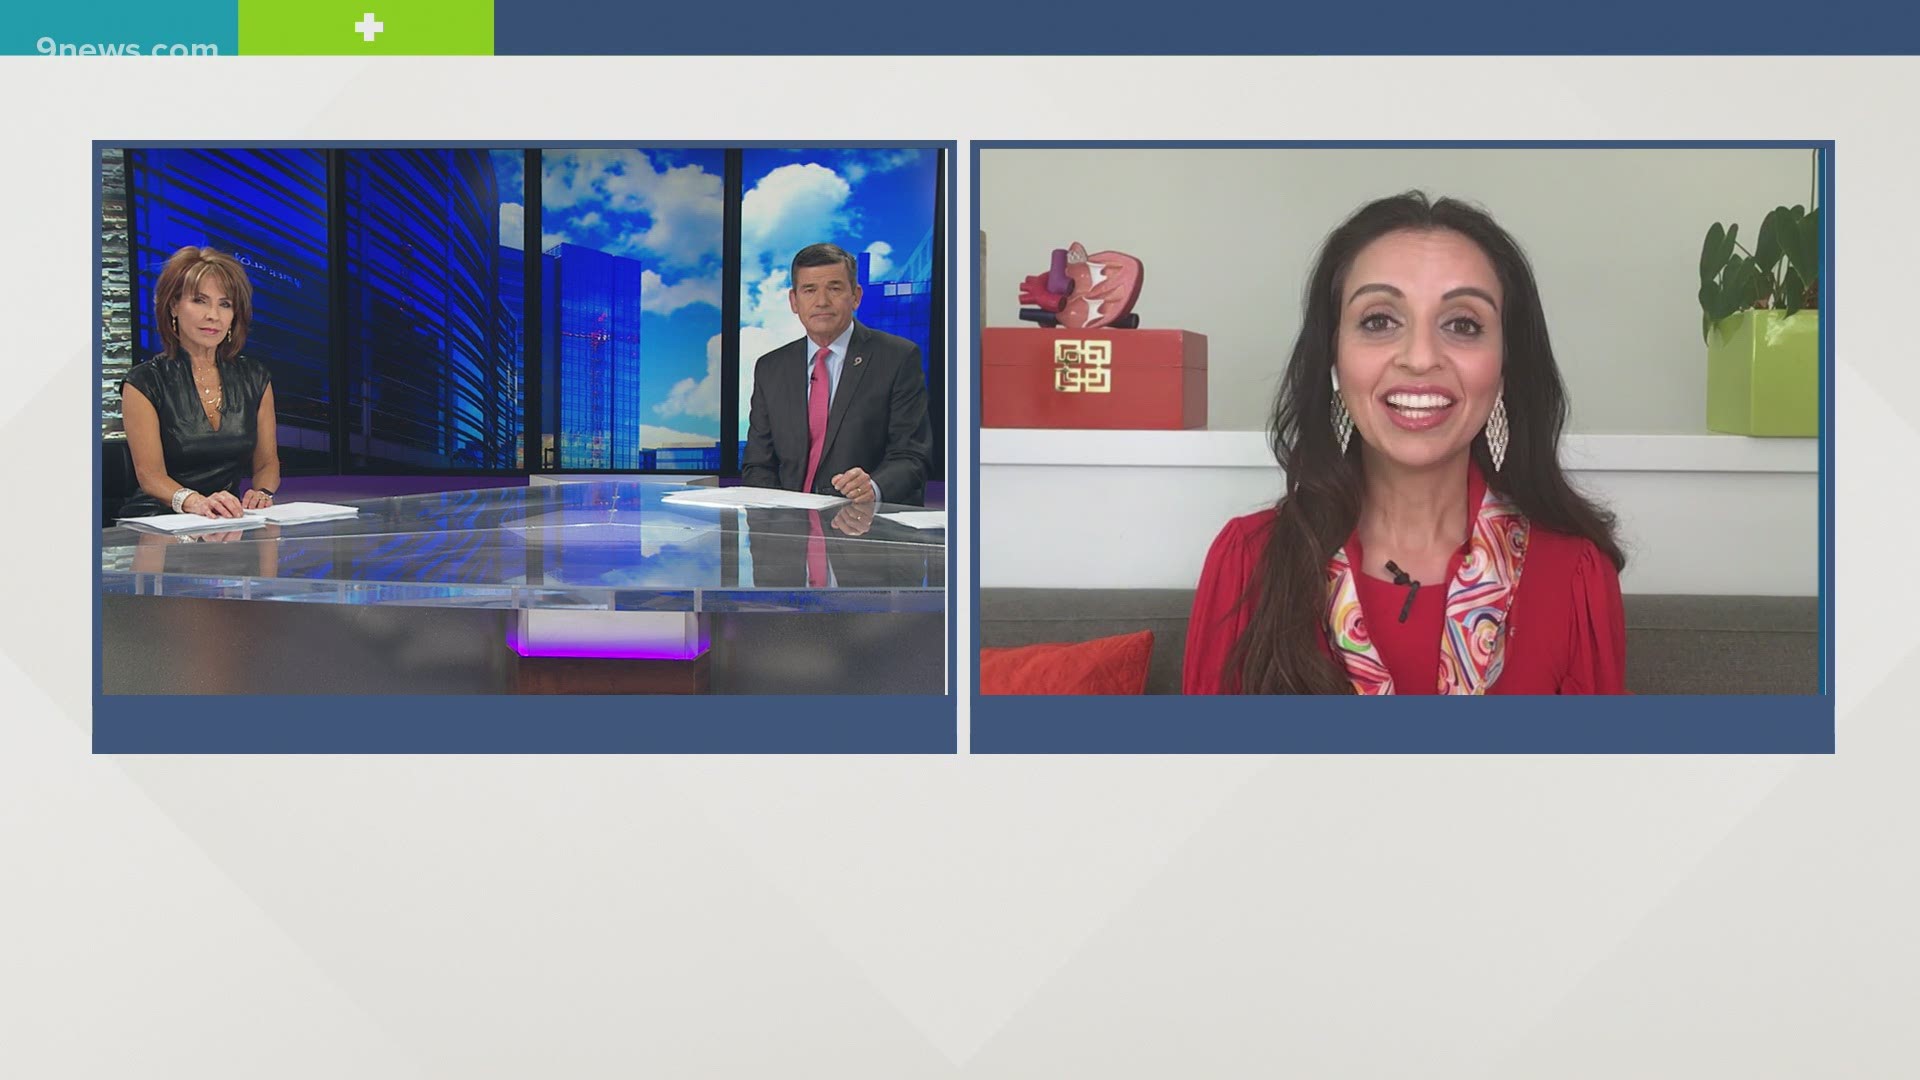 Our 9NEWS health expert - Dr. Payal Kohli - joins us to give her thoughts on the CDC's decision.